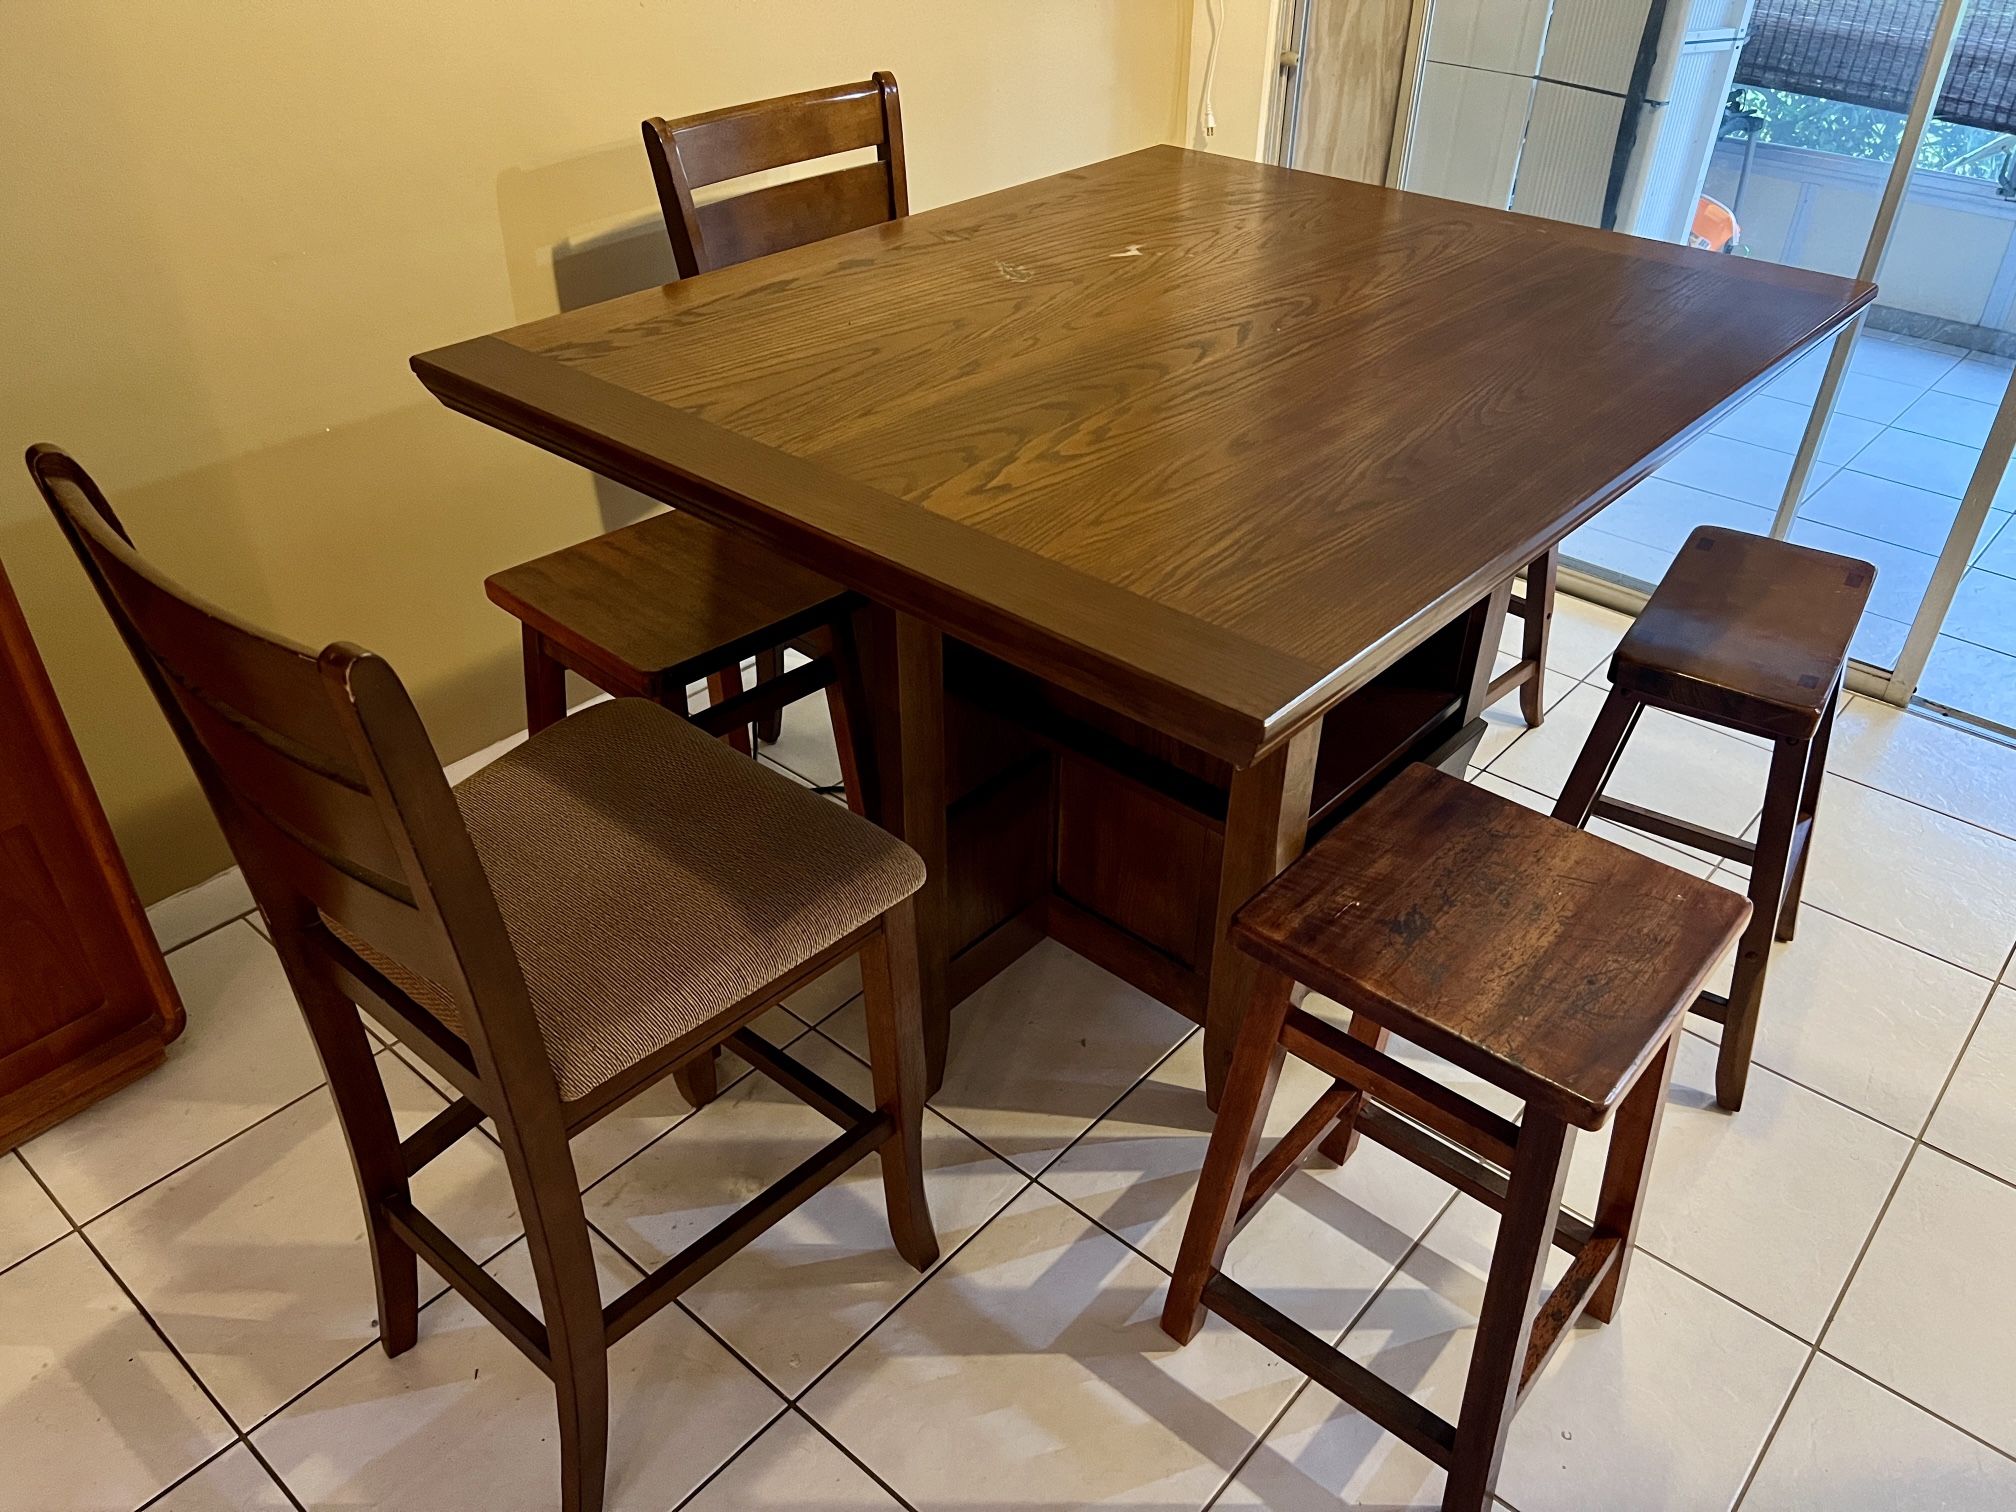 Hardwood Hightop Dining Table with built in Wine Racks and Storage with Chairs